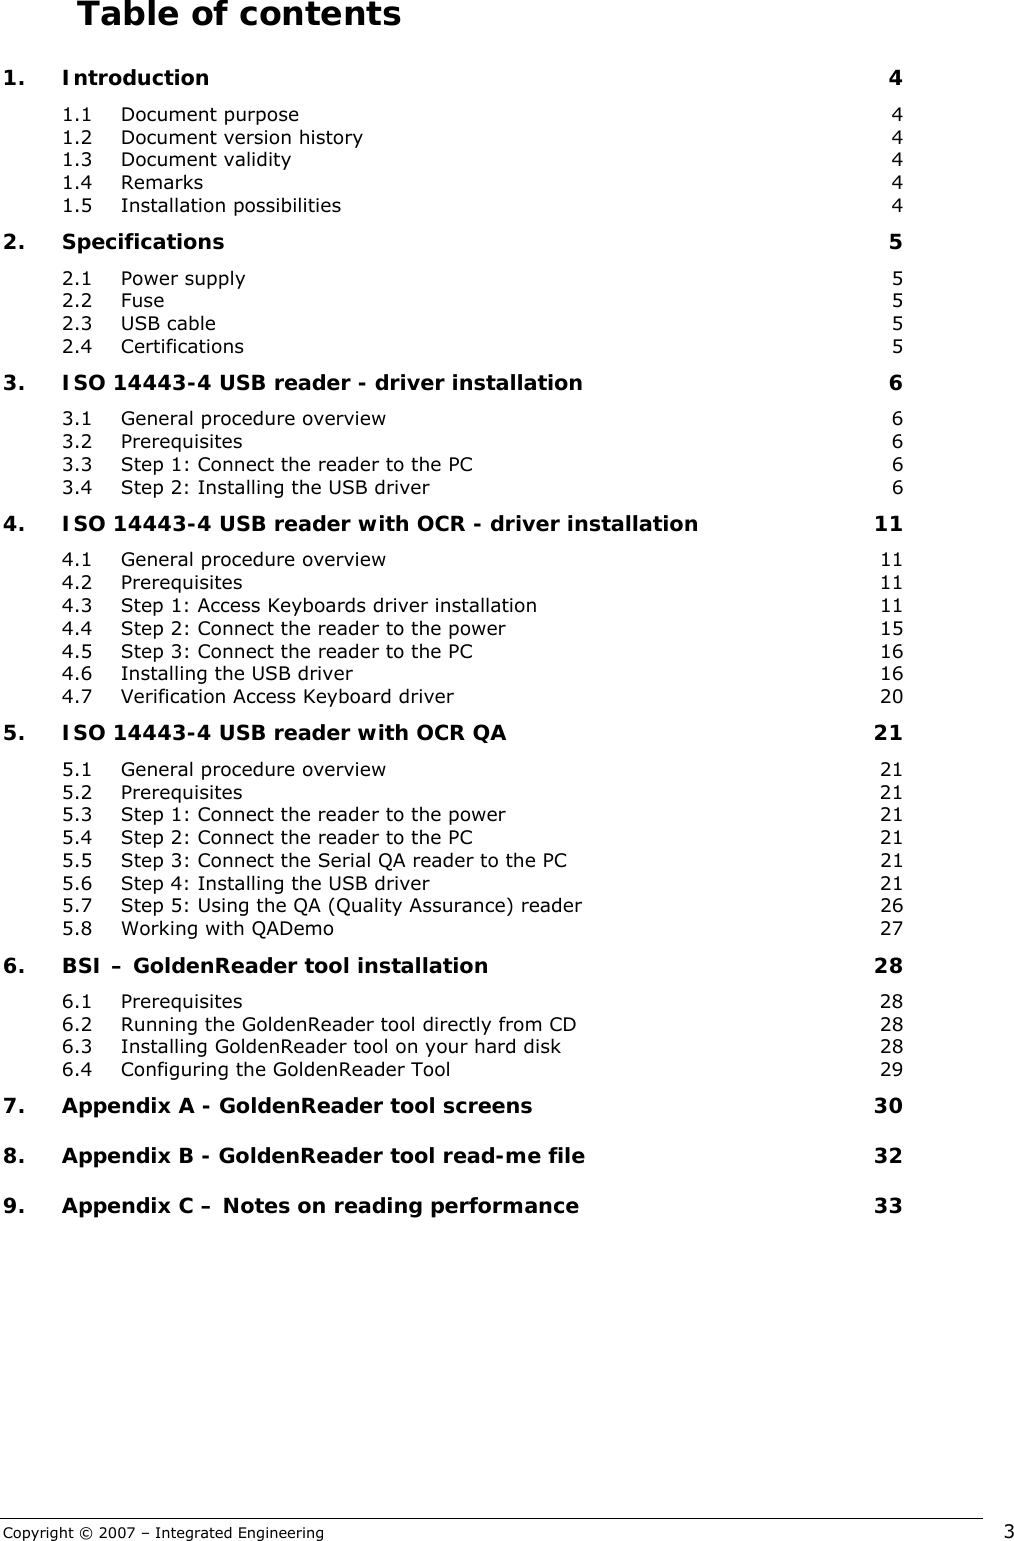 Copyright © 2007 – Integrated Engineering   3 Table of contents 1. Introduction  4 1.1 Document purpose  4 1.2 Document version history  4 1.3 Document validity  4 1.4 Remarks  4 1.5 Installation possibilities  4 2. Specifications 5 2.1 Power supply  5 2.2 Fuse  5 2.3 USB cable  5 2.4 Certifications  5 3. ISO 14443-4 USB reader - driver installation  6 3.1 General procedure overview  6 3.2 Prerequisites  6 3.3 Step 1: Connect the reader to the PC  6 3.4 Step 2: Installing the USB driver  6 4. ISO 14443-4 USB reader with OCR - driver installation  11 4.1 General procedure overview  11 4.2 Prerequisites  11 4.3 Step 1: Access Keyboards driver installation  11 4.4 Step 2: Connect the reader to the power  15 4.5 Step 3: Connect the reader to the PC  16 4.6 Installing the USB driver  16 4.7 Verification Access Keyboard driver  20 5. ISO 14443-4 USB reader with OCR QA  21 5.1 General procedure overview  21 5.2 Prerequisites  21 5.3 Step 1: Connect the reader to the power  21 5.4 Step 2: Connect the reader to the PC  21 5.5 Step 3: Connect the Serial QA reader to the PC  21 5.6 Step 4: Installing the USB driver  21 5.7 Step 5: Using the QA (Quality Assurance) reader  26 5.8 Working with QADemo  27 6. BSI – GoldenReader tool installation  28 6.1 Prerequisites  28 6.2 Running the GoldenReader tool directly from CD  28 6.3 Installing GoldenReader tool on your hard disk  28 6.4 Configuring the GoldenReader Tool  29 7. Appendix A - GoldenReader tool screens  30 8. Appendix B - GoldenReader tool read-me file  32 9. Appendix C – Notes on reading performance  33     